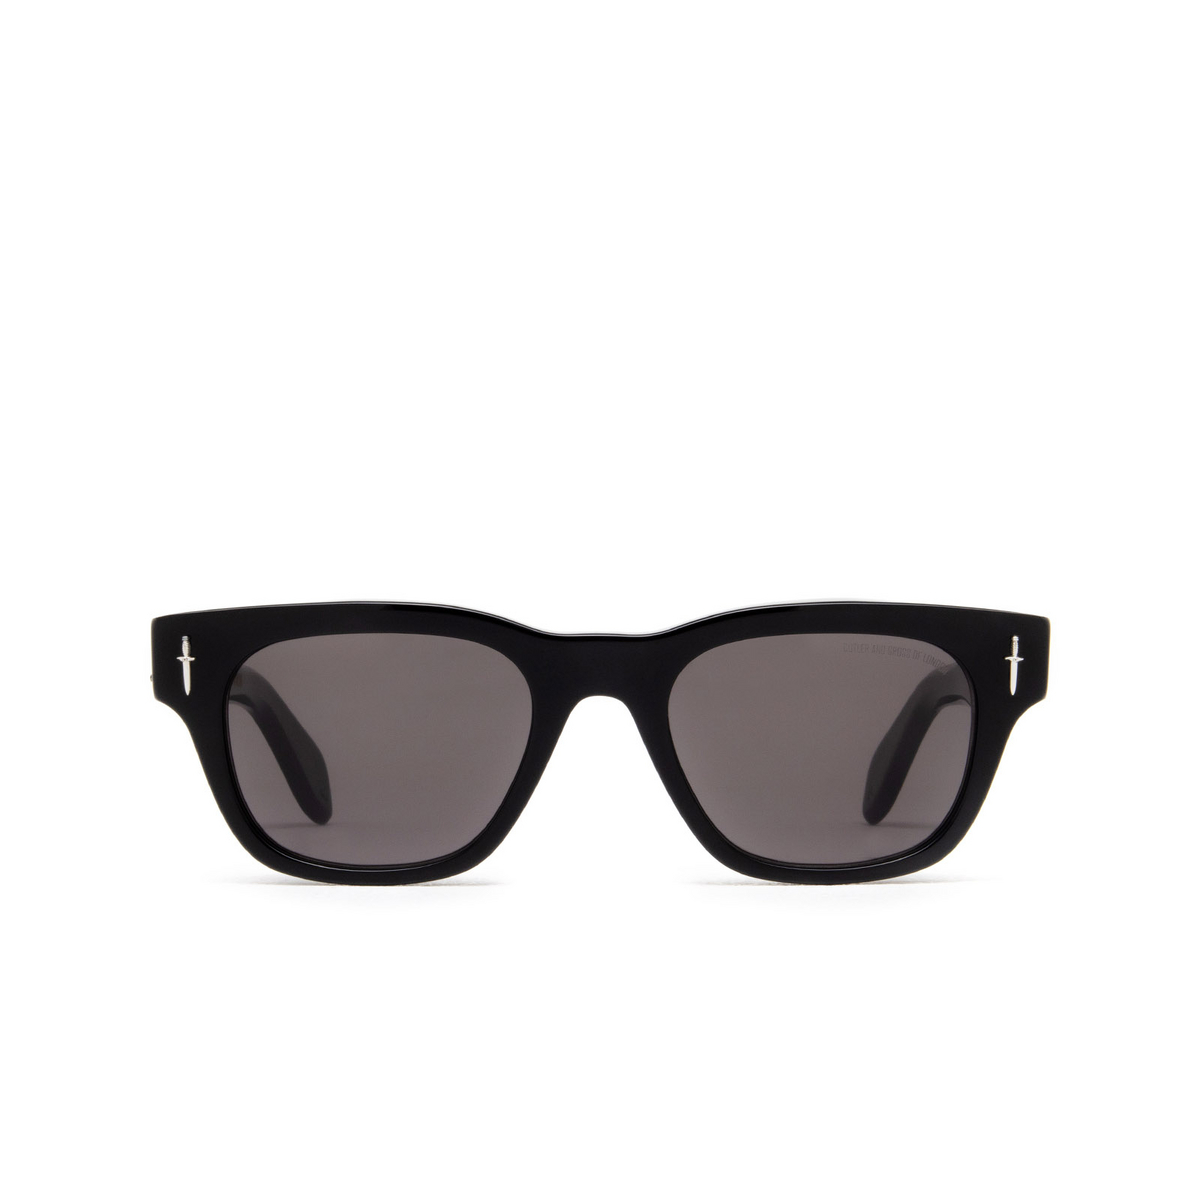 Cutler and Gross 003 Sunglasses 01 Black - front view